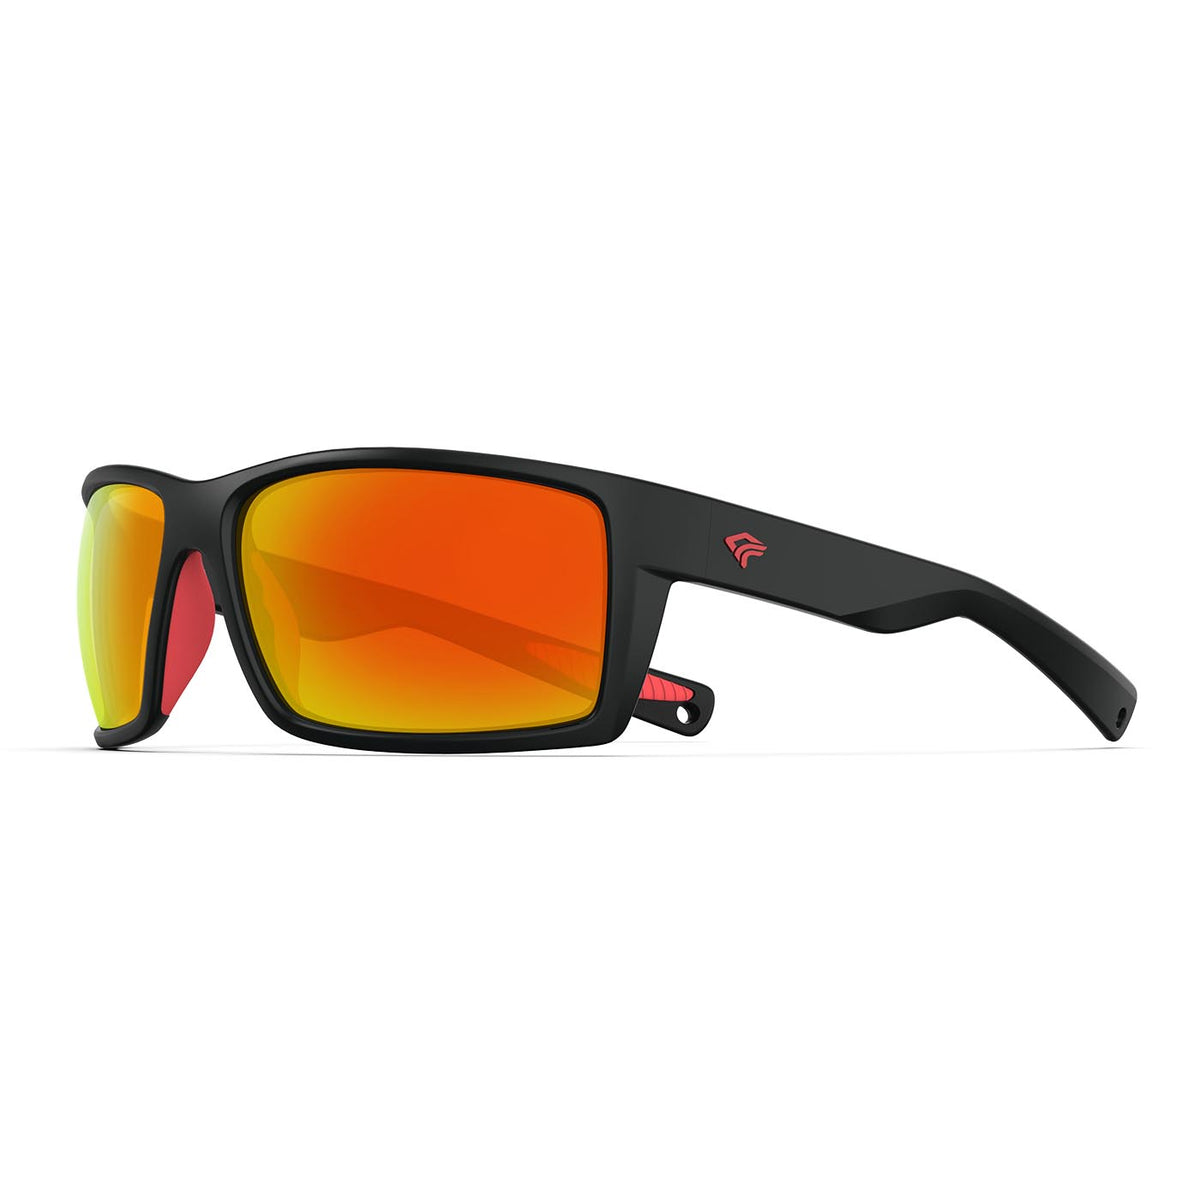 Tension Polarized Sports Sunglasses for Men and Women With Lifetime  Warranty - Perfect for Fishing, Boating, Beach, Golf, surf & Driving -  Black Frame & Sunlight Orange Lens